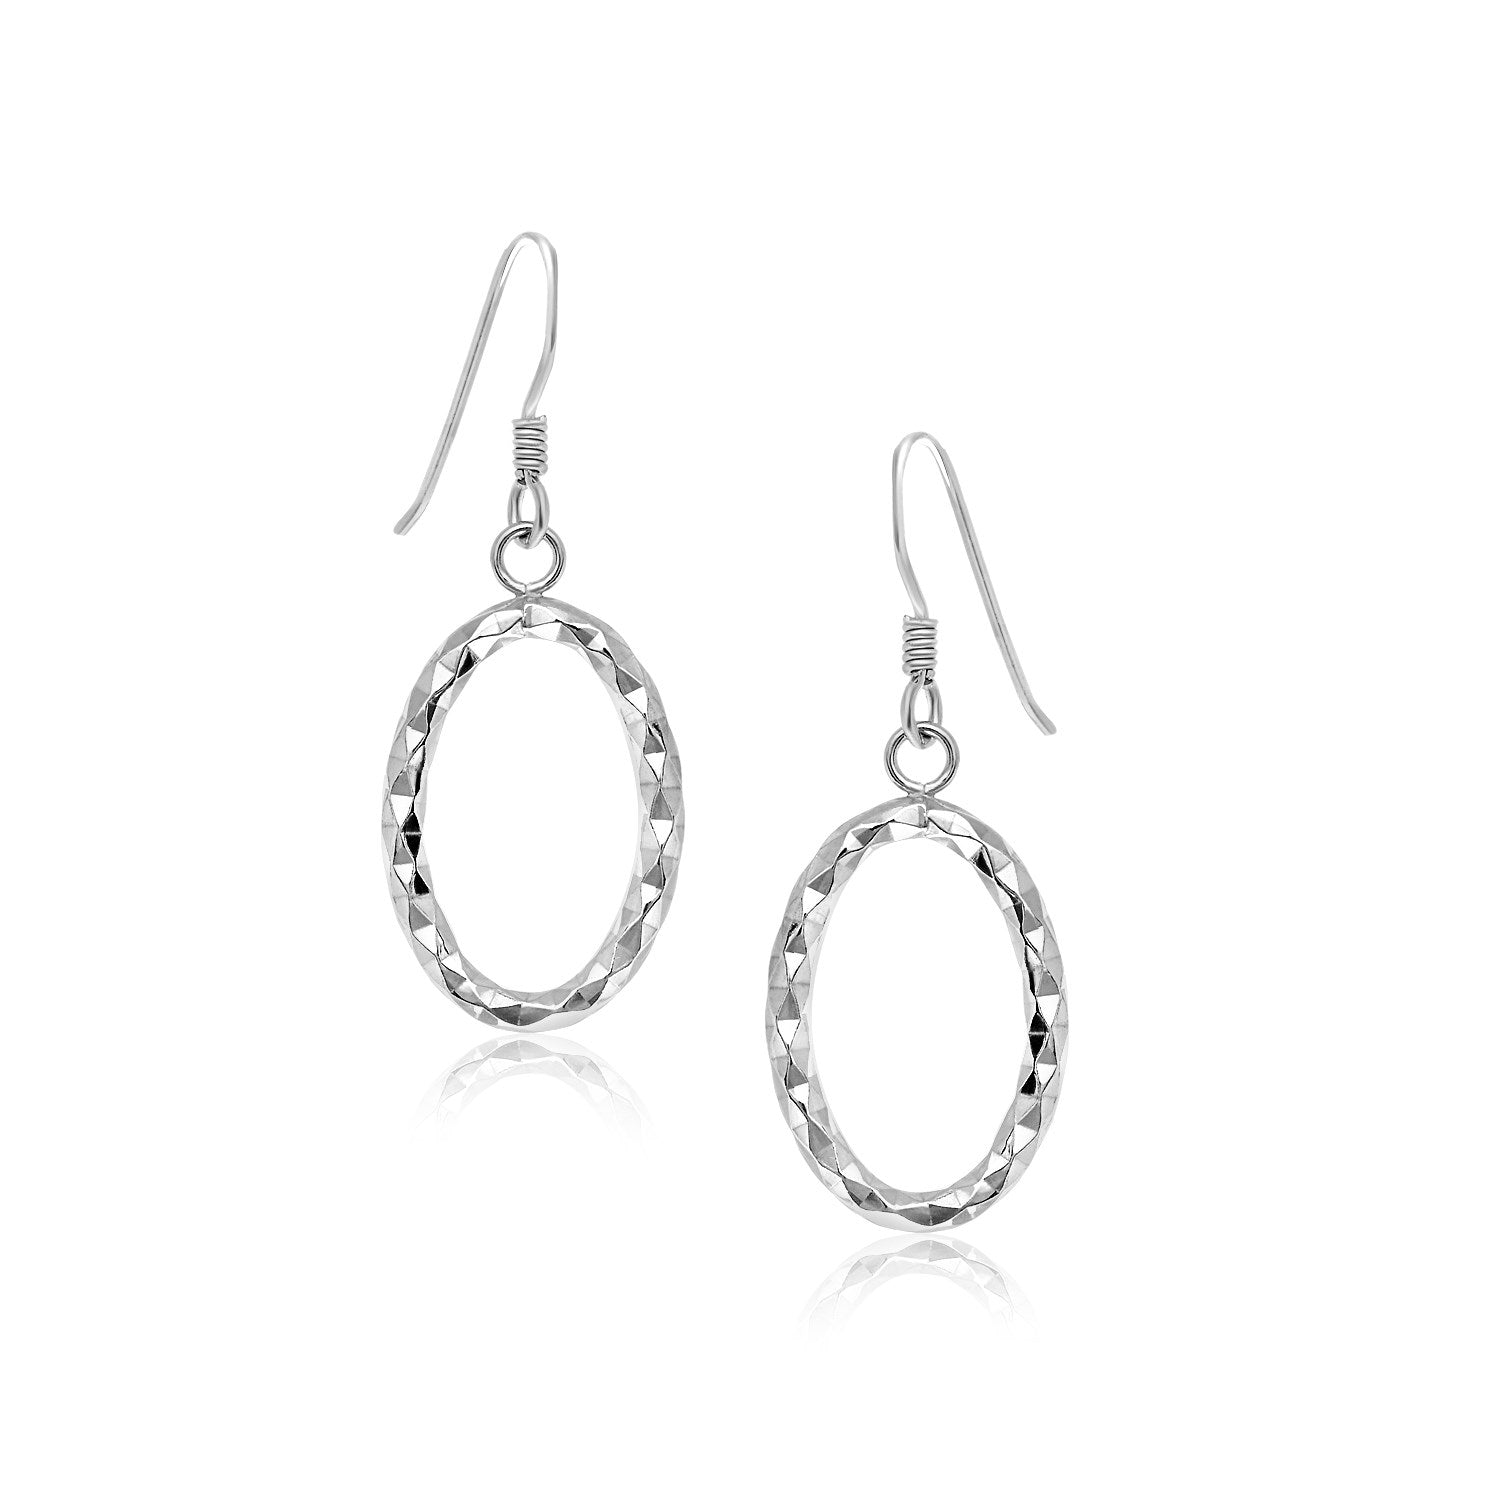 Sterling Silver Open Oval Drop Earrings with Textured Design